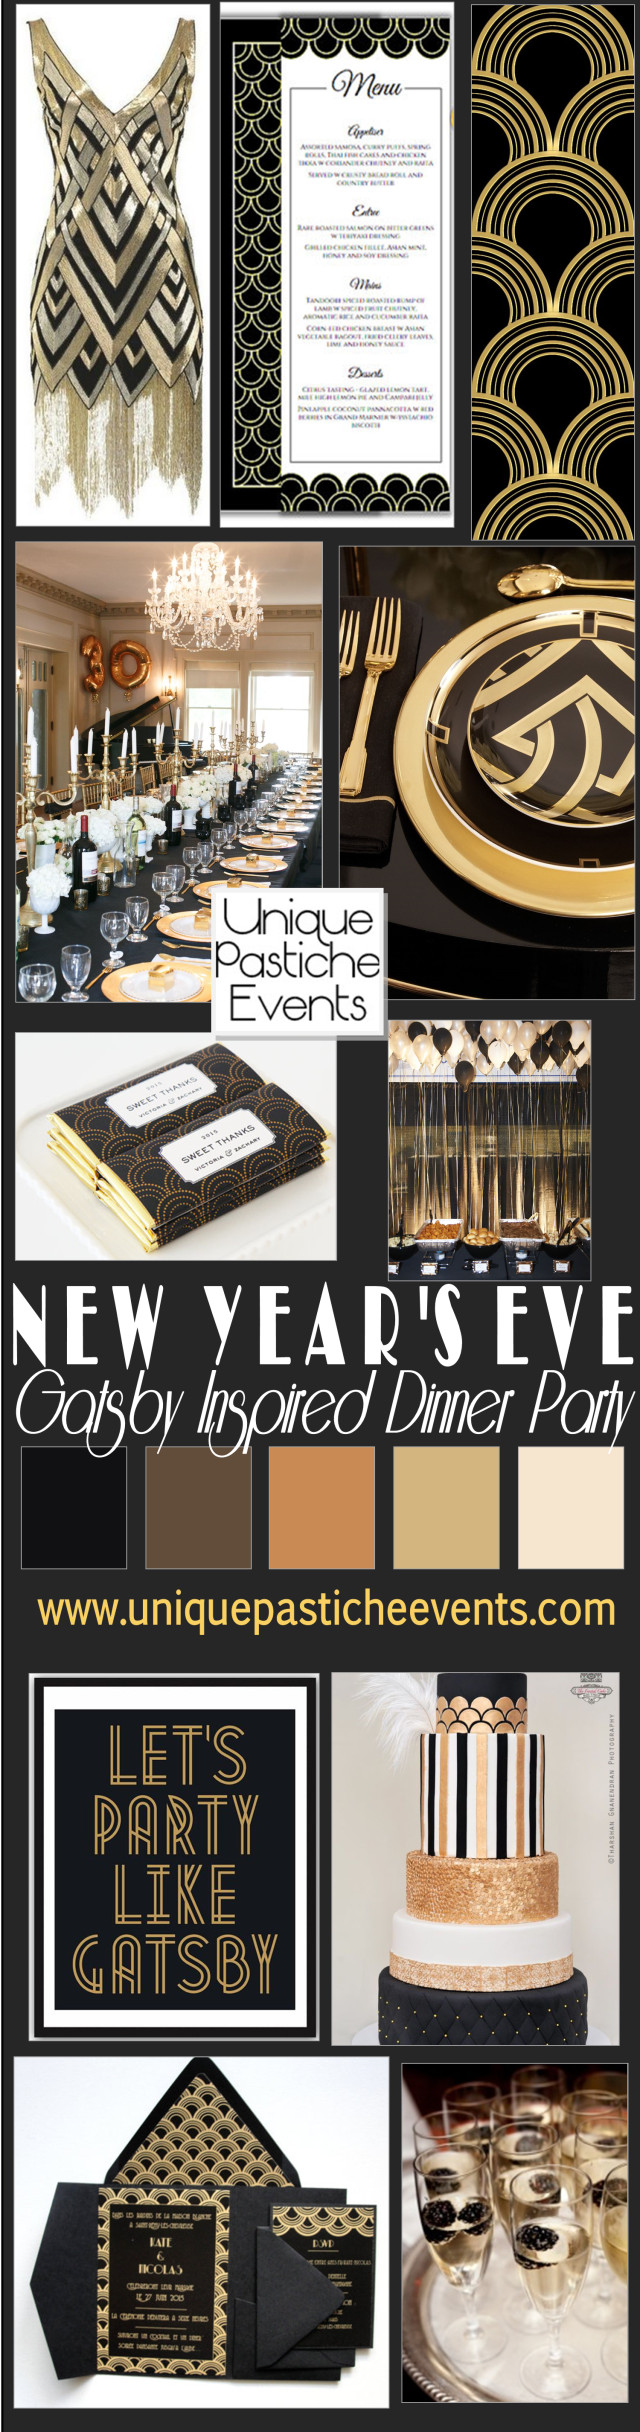 New Years Eve Dinner Party Ideas
 Gatsby Inspired New Year’s Eve Dinner Party Ideas